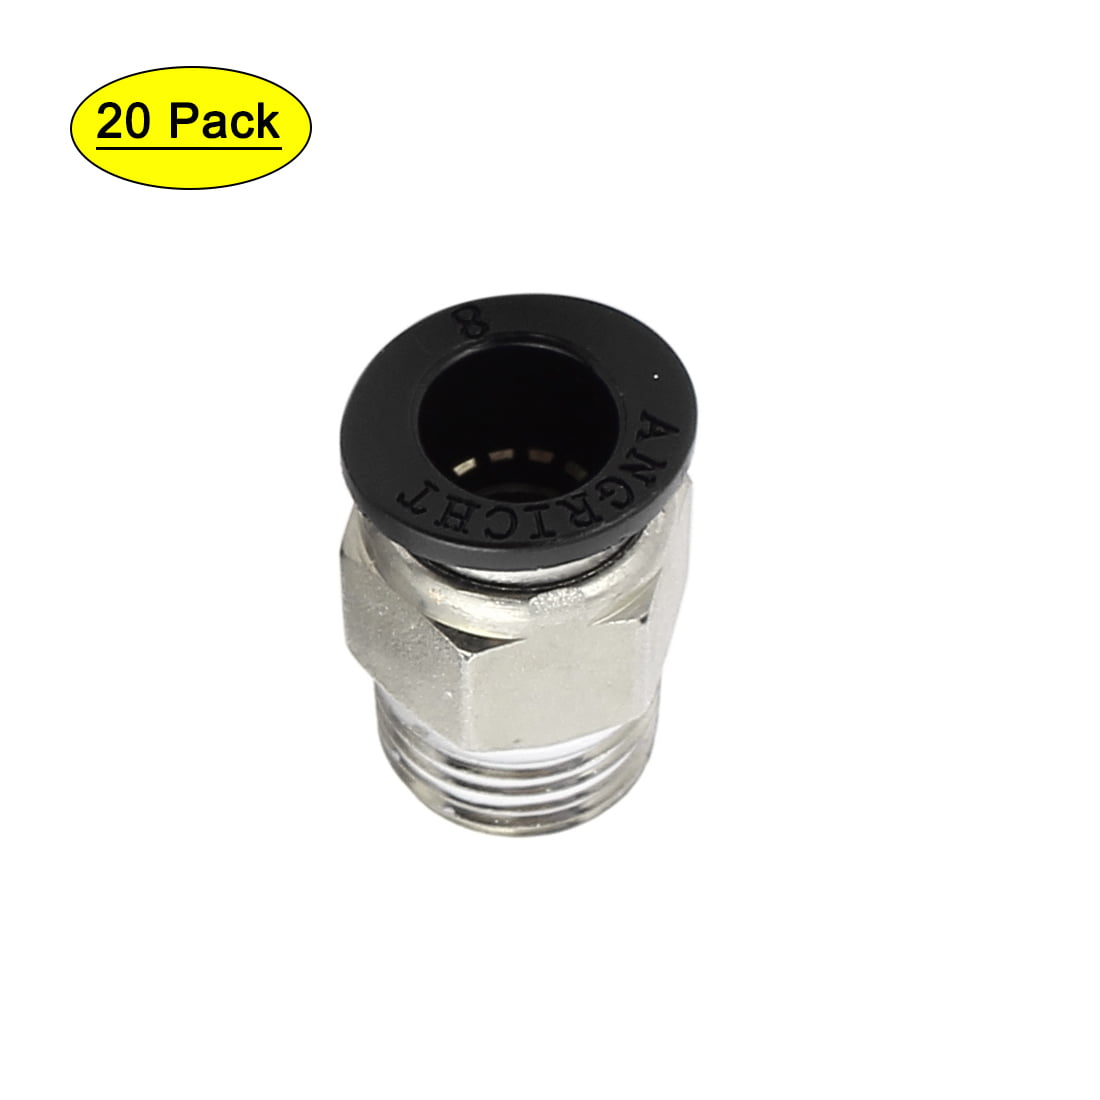 20Pcs 8mm Dia 4 Ways Hose Pneumatic Air Quick Fitting Push In Connector Black 